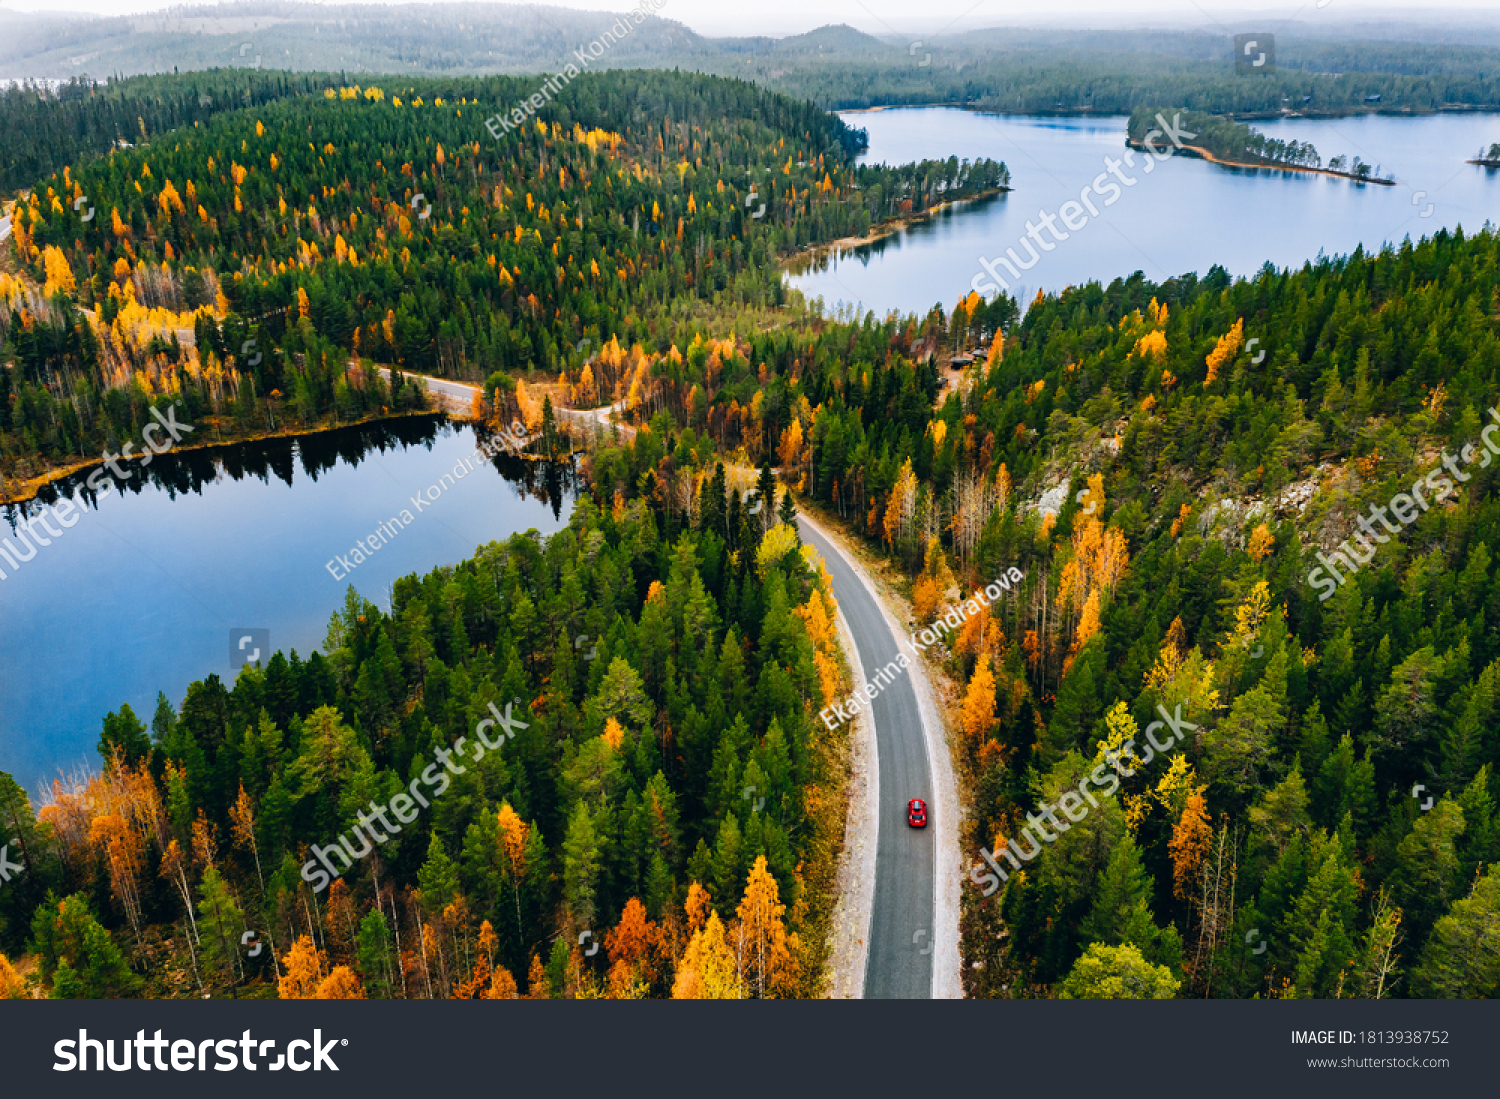 Aerial view of rural road with red car in yellow and orange autumn forest with blue lake in Finland. #1813938752